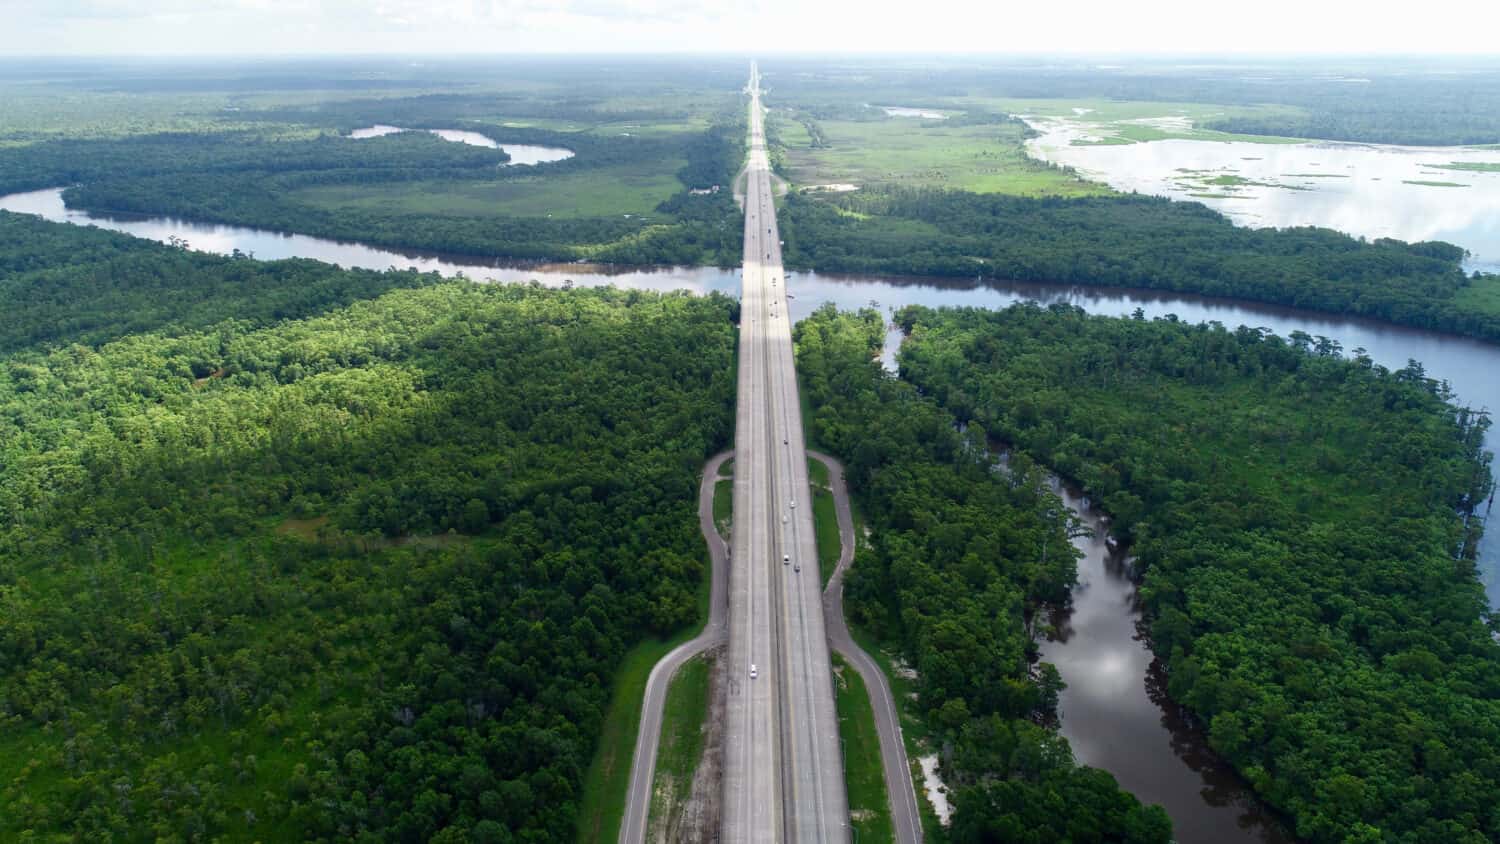 Busy highway surrounded by trees and a the gorgeous, curving, Sabine river. This river is at the border between Texas and Louisiana.